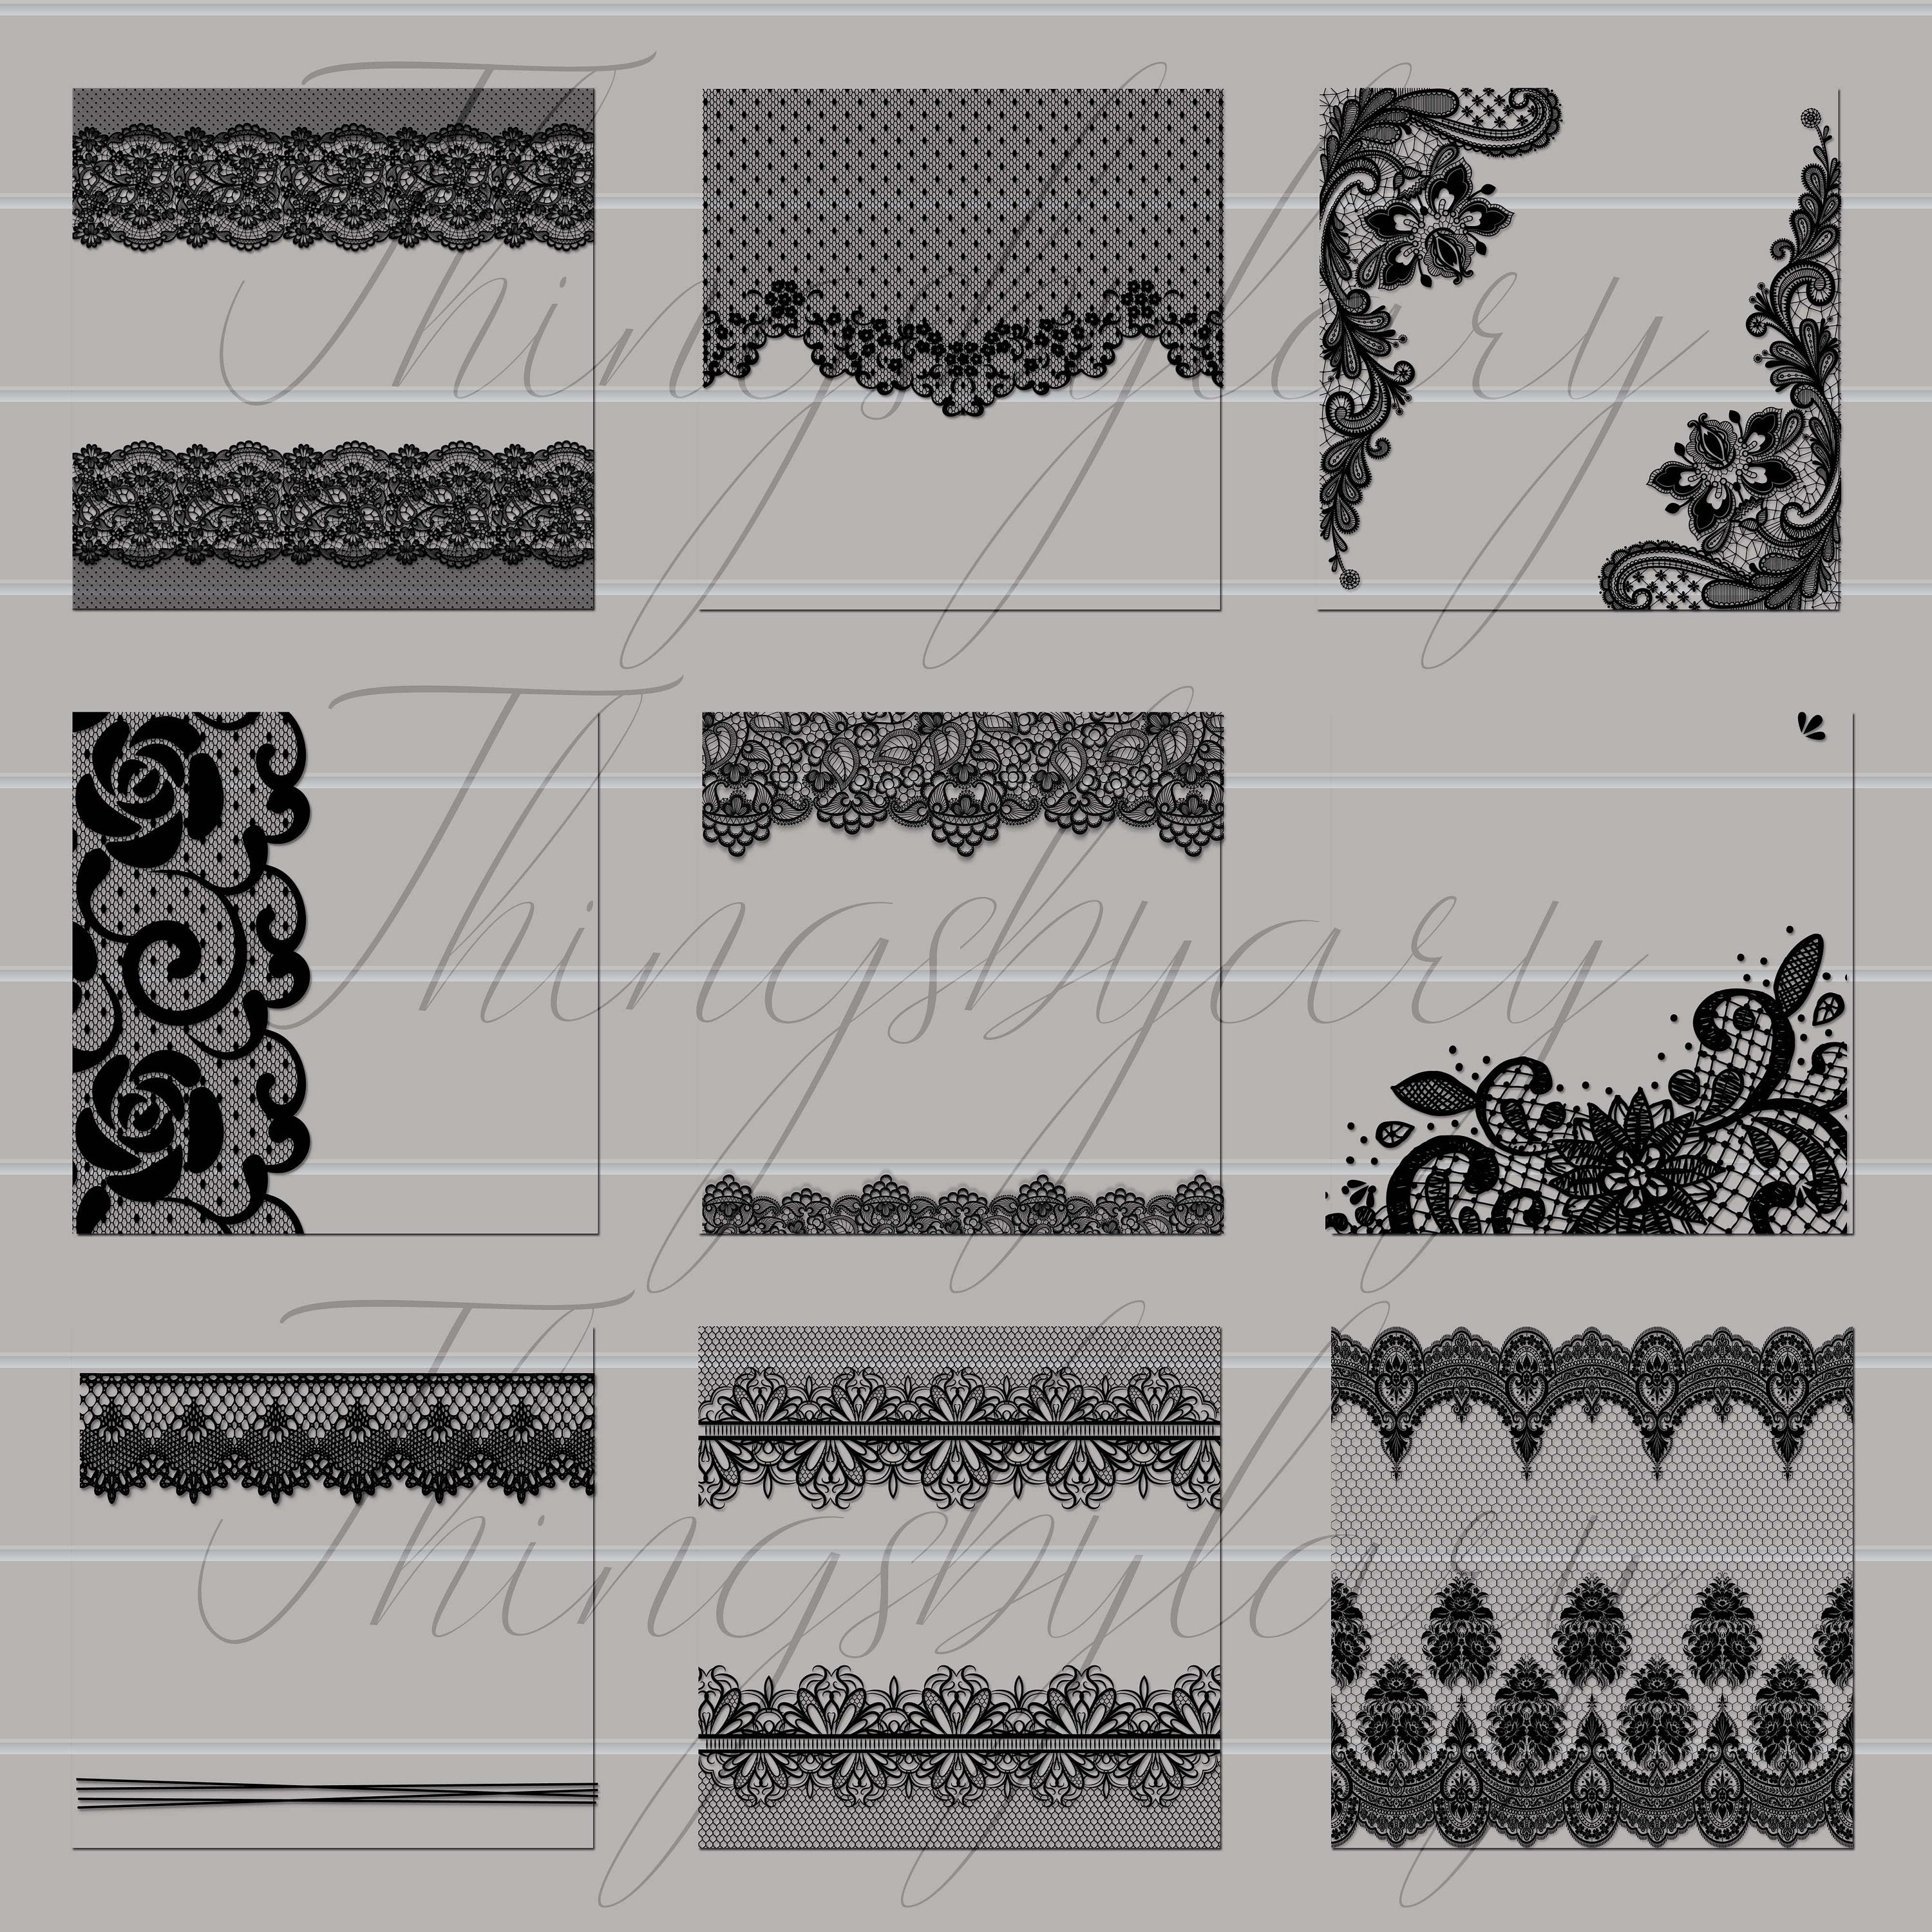 27 Black Lace Overlays Borders Frames Images PNG Transparent 300 Dpi Instant Download Commercial Use Shabby Chic Gothic Black Widow Lacy Net